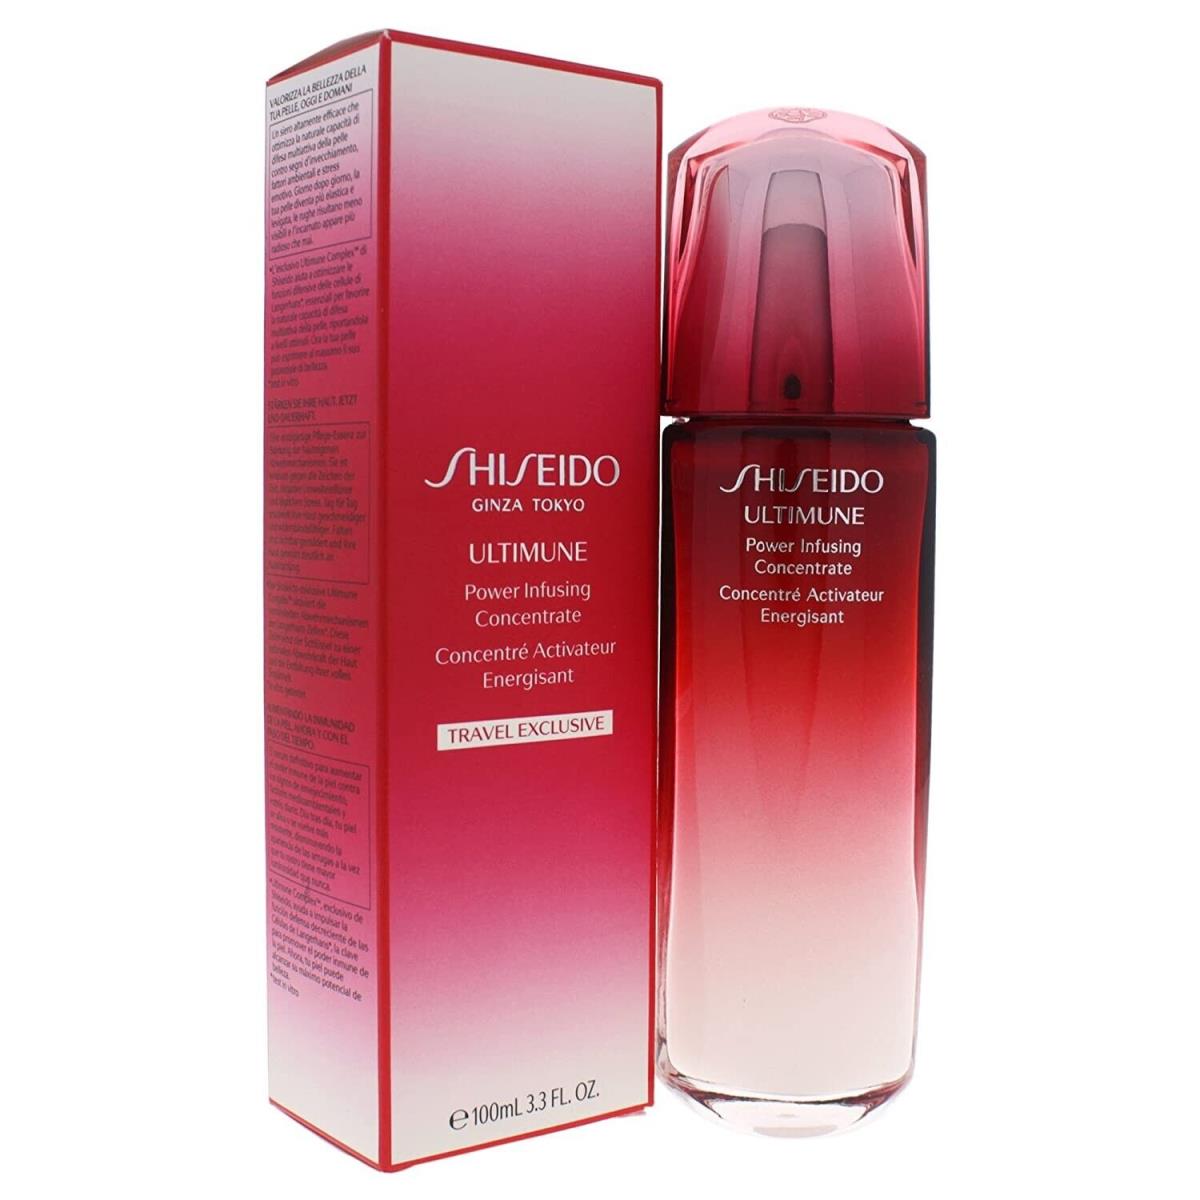 Shiseido Ultimune Power Infusing Concentrate 3.3oz - 100ml